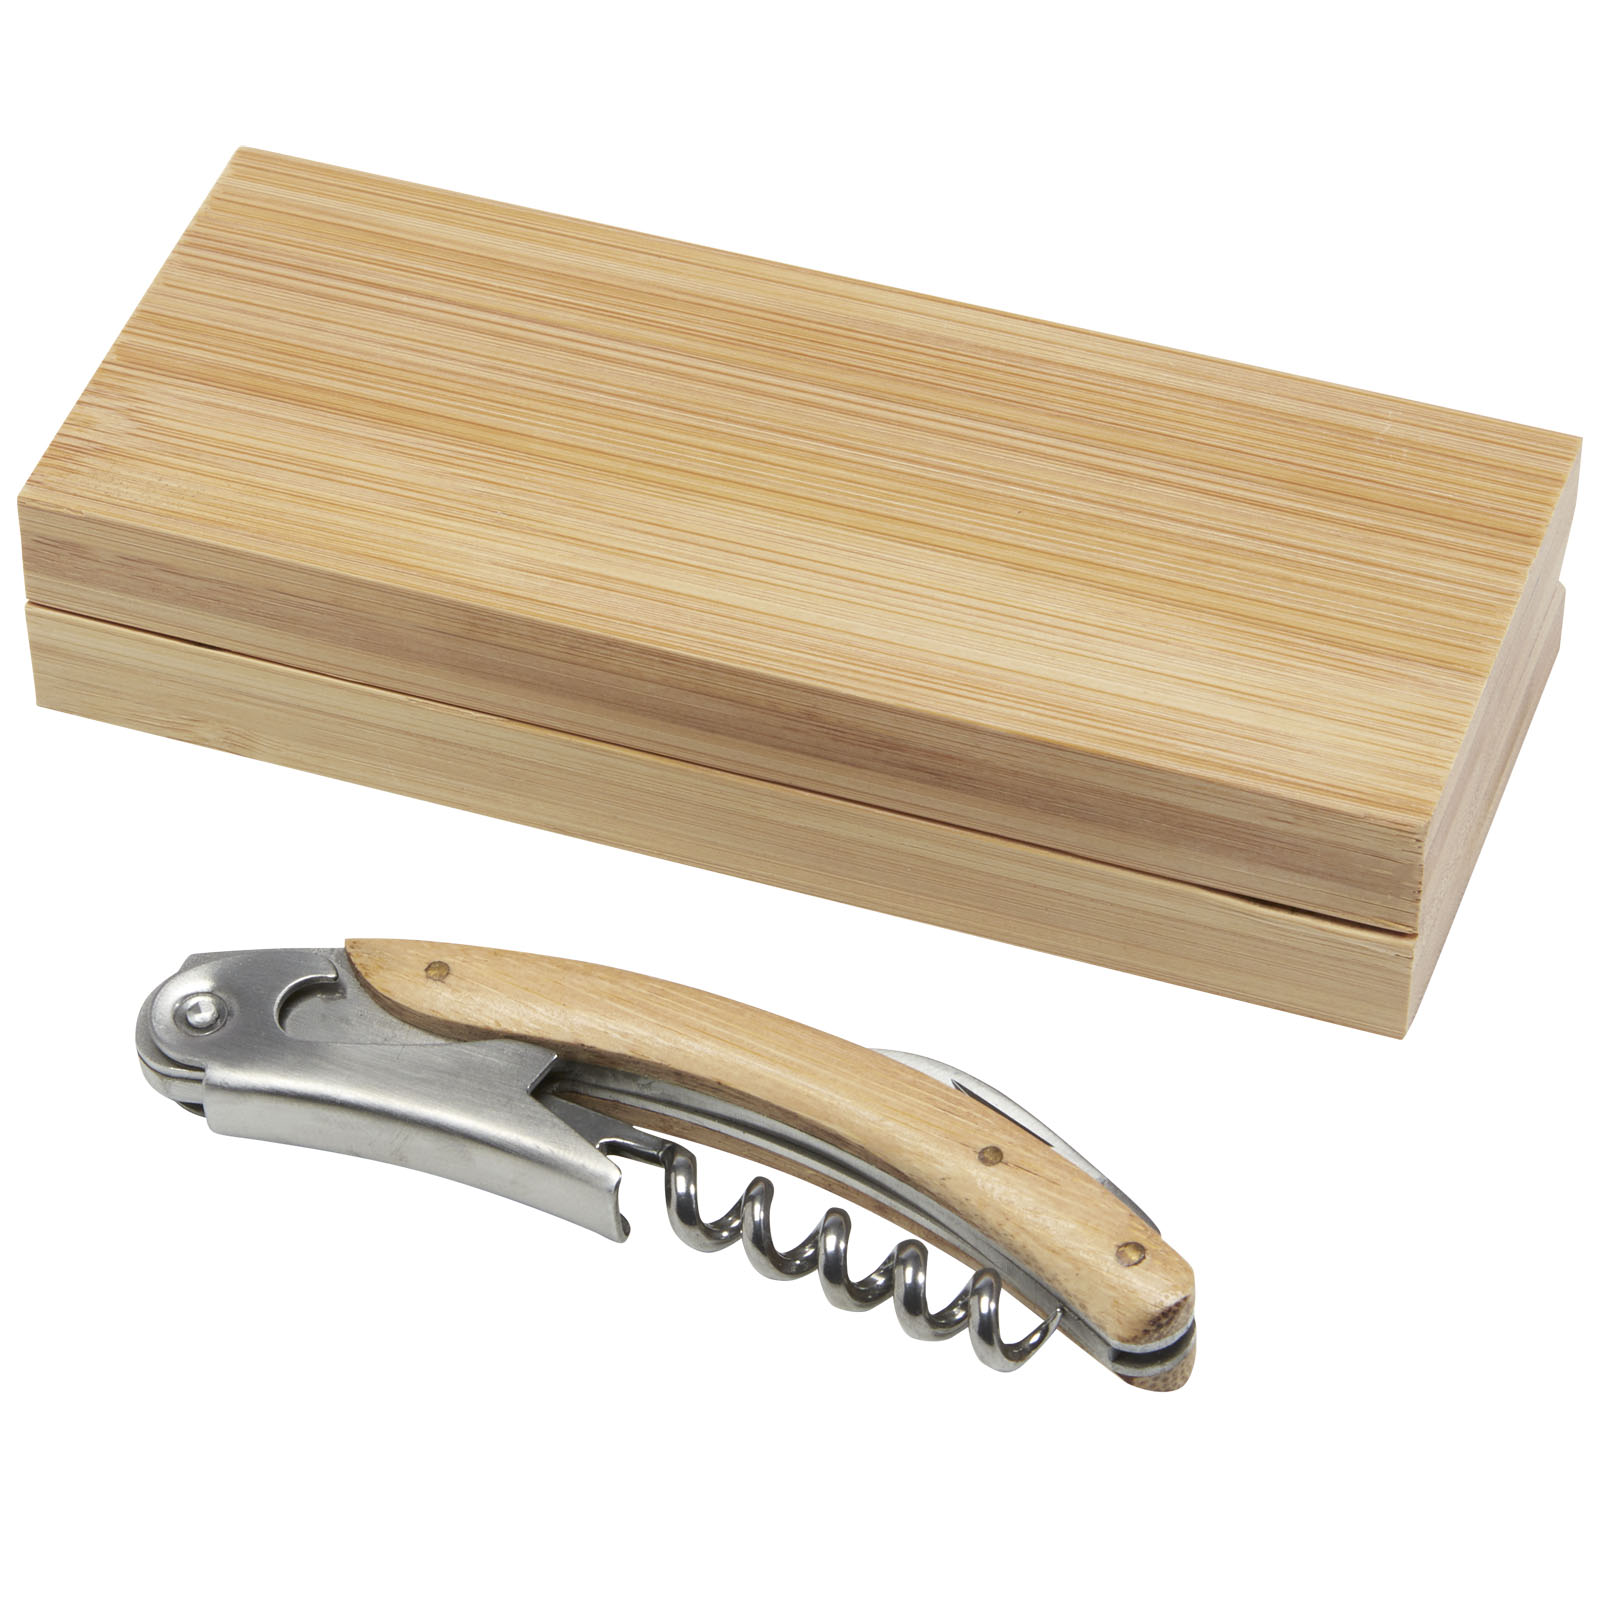 Metal waiter's opener RIVELU with bamboo surface - natural